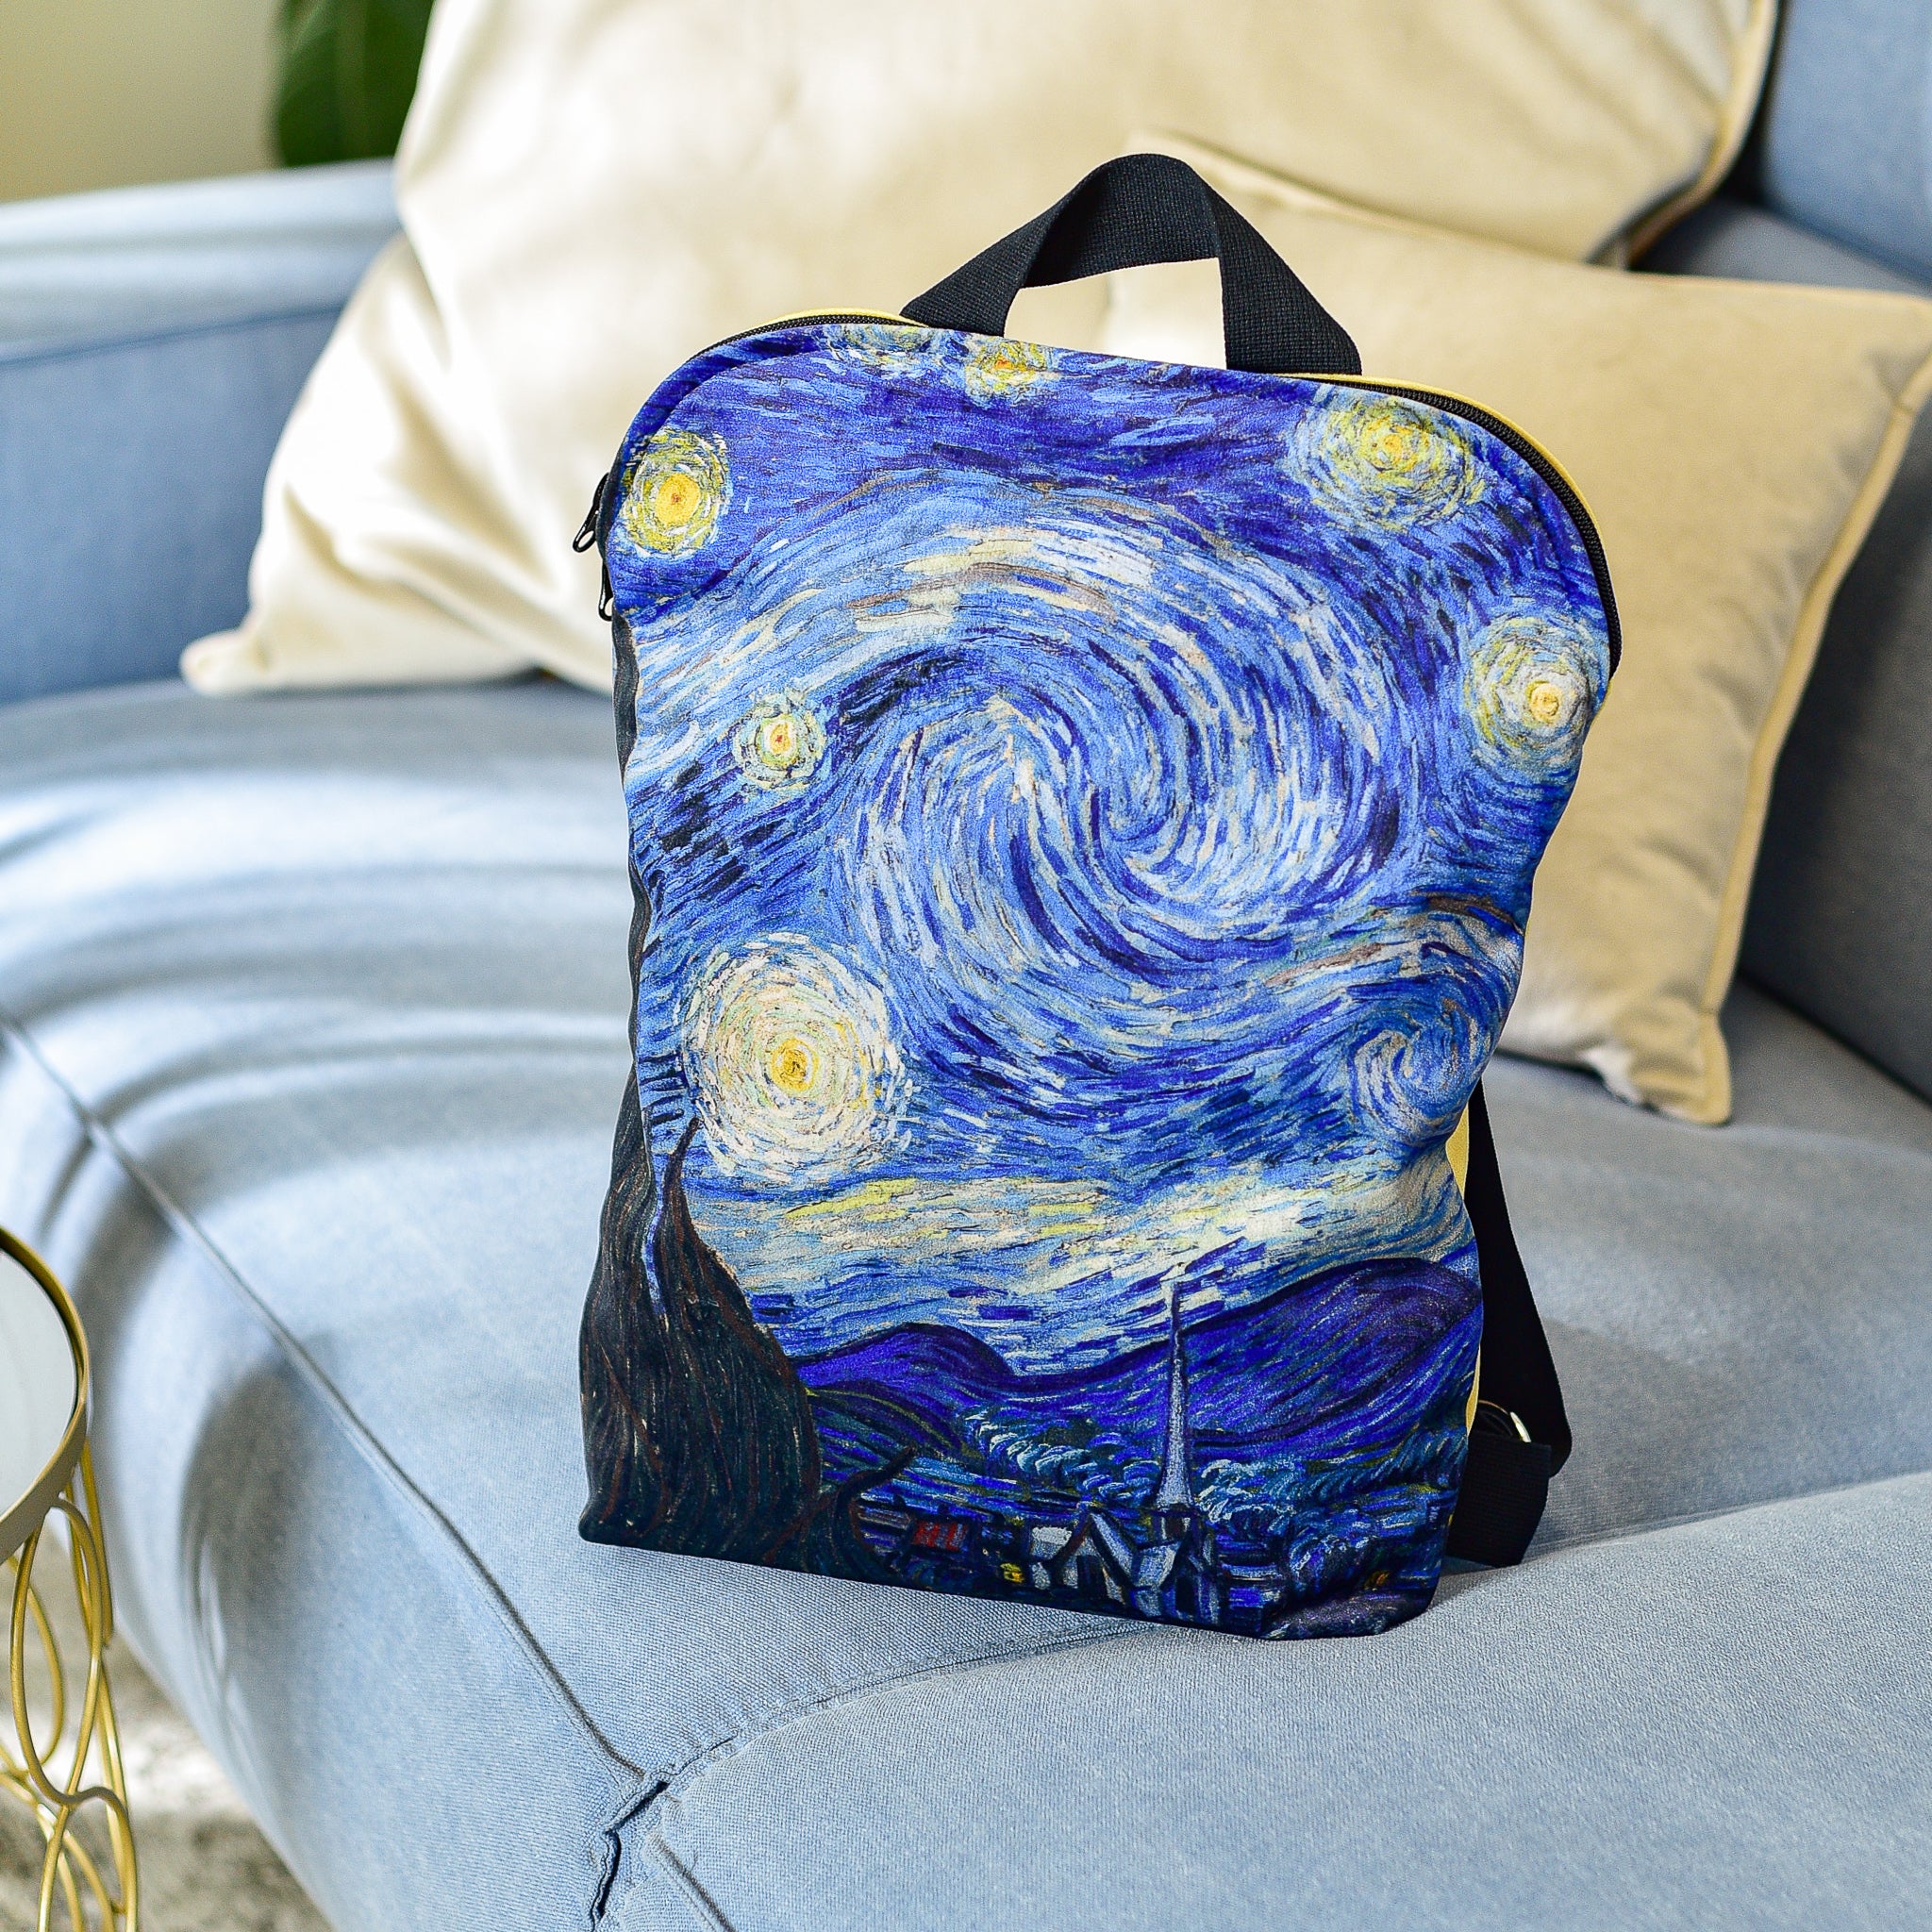 Backpack Vincent van Gogh "The Starry Night"